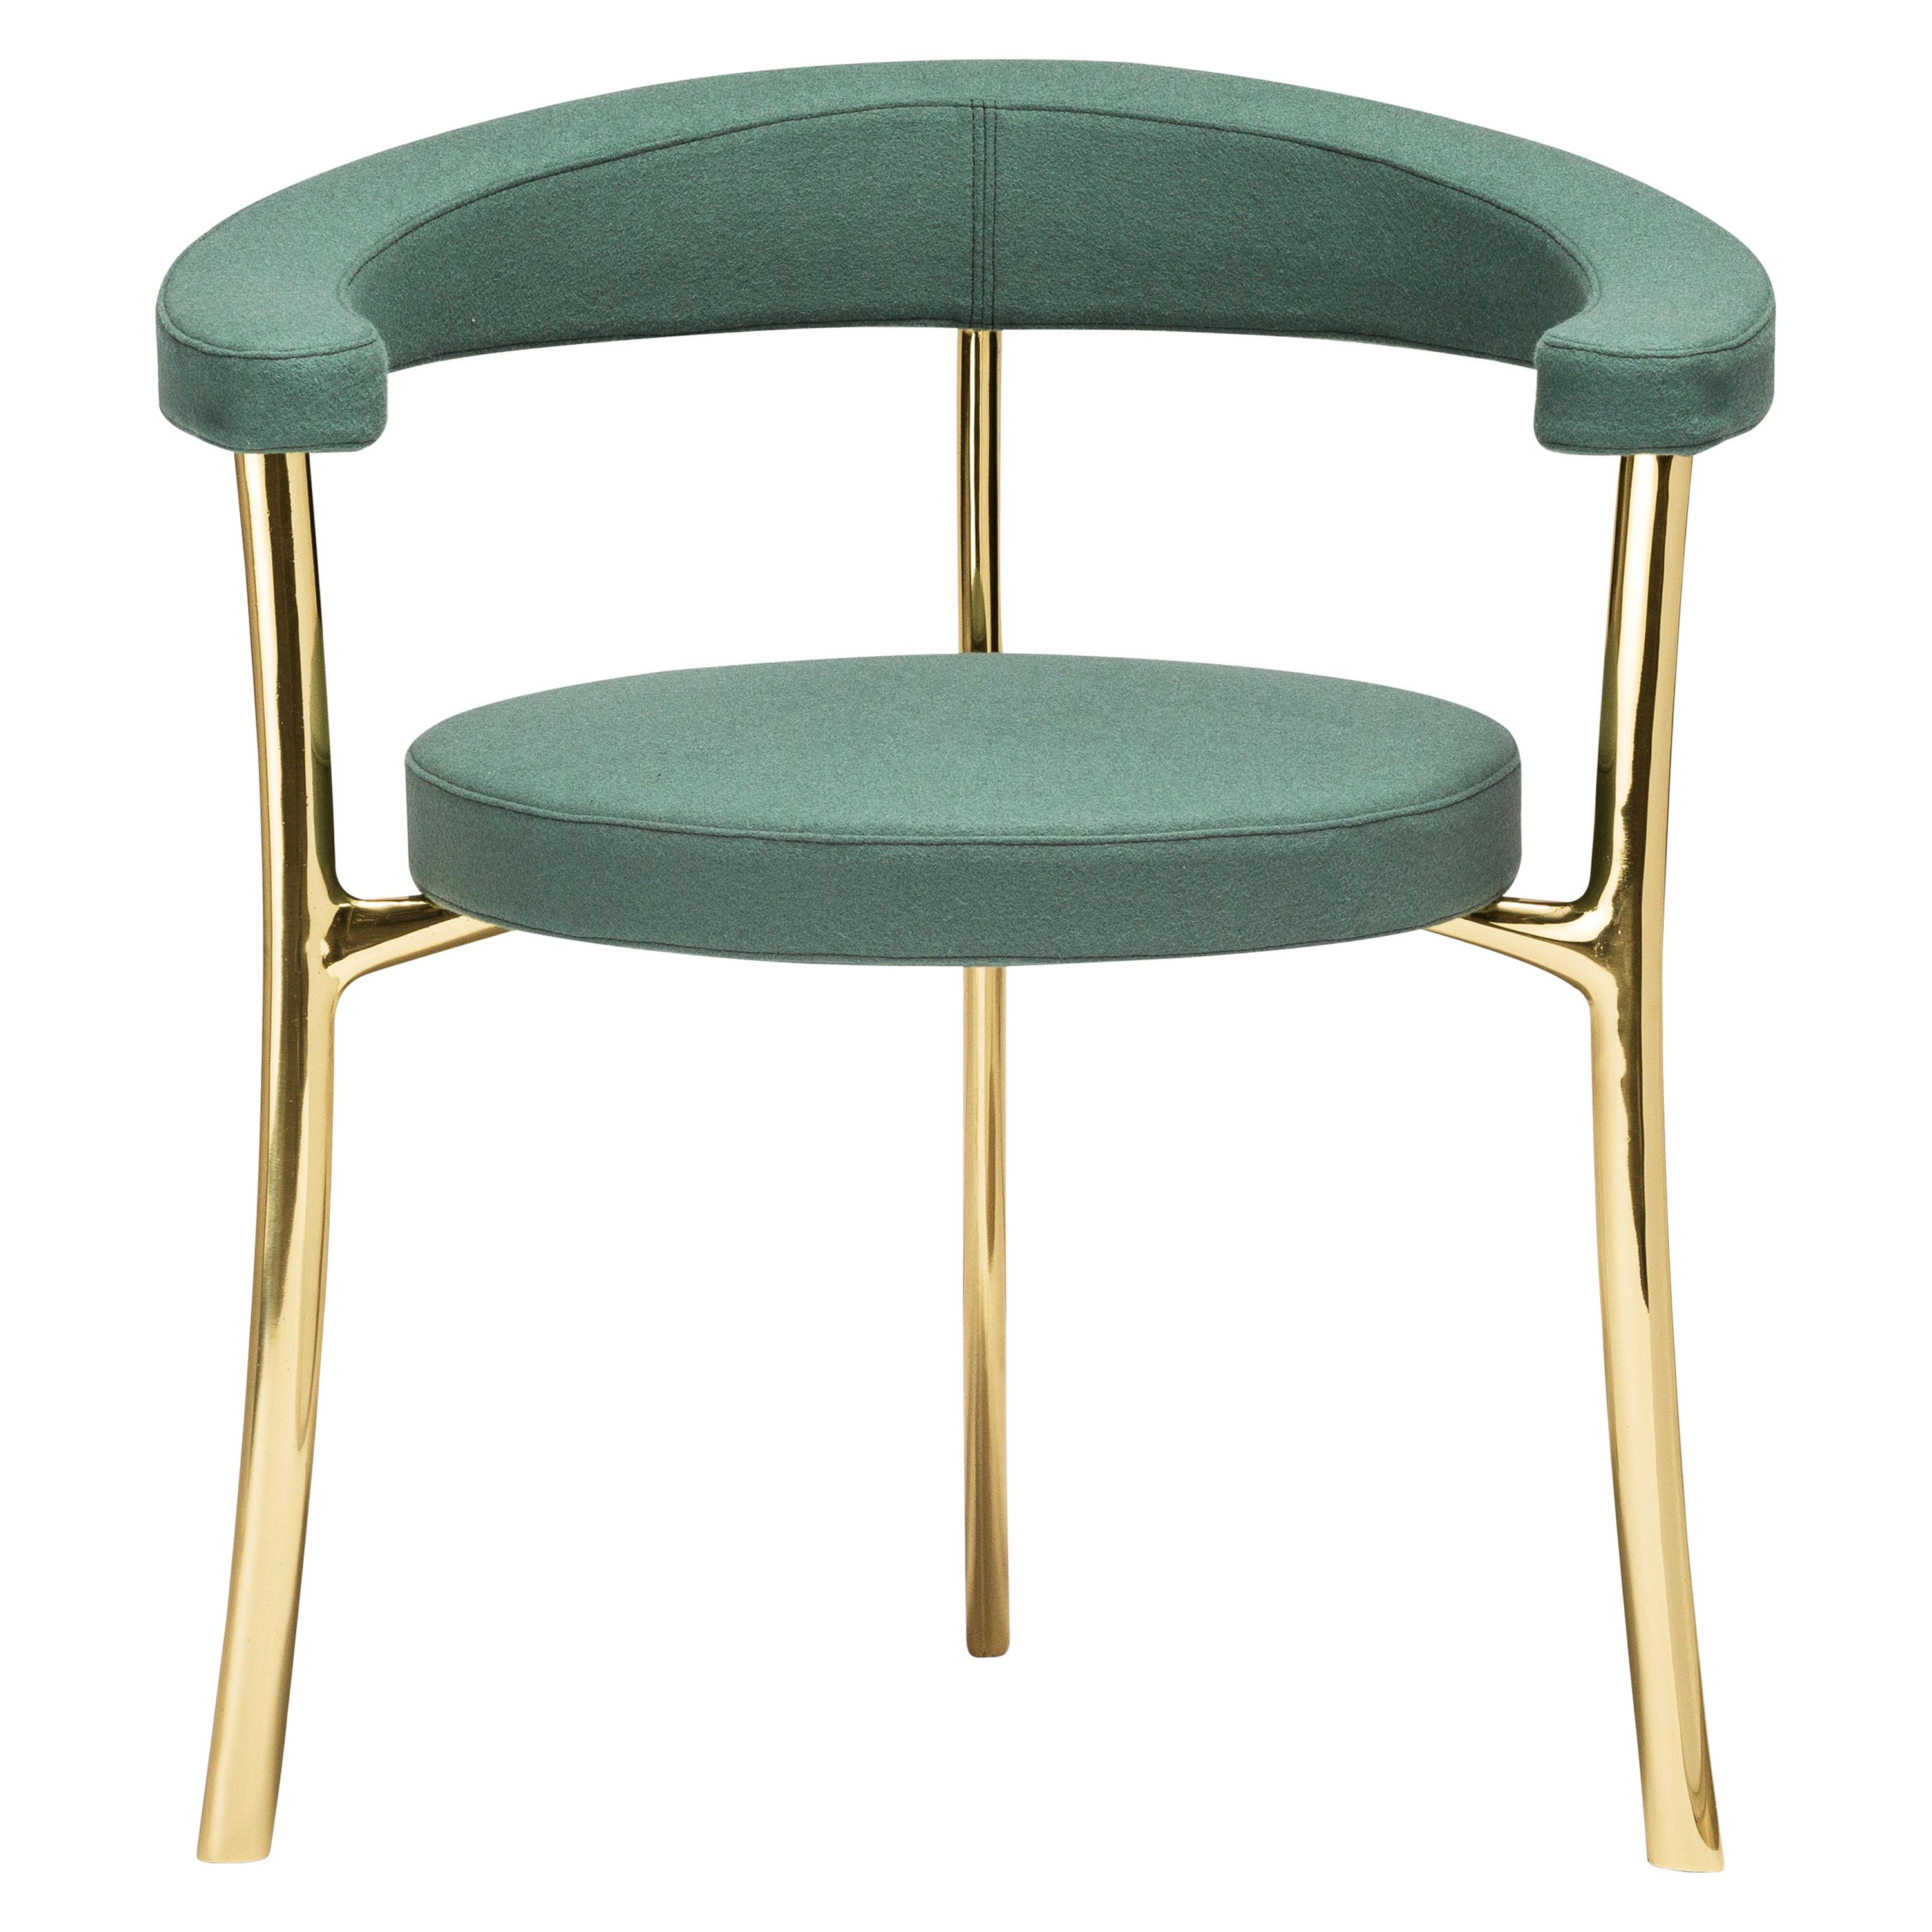 Katana Armchair in Dark Green Fabric with Polished Brass by Paolo Rizzatto For Sale